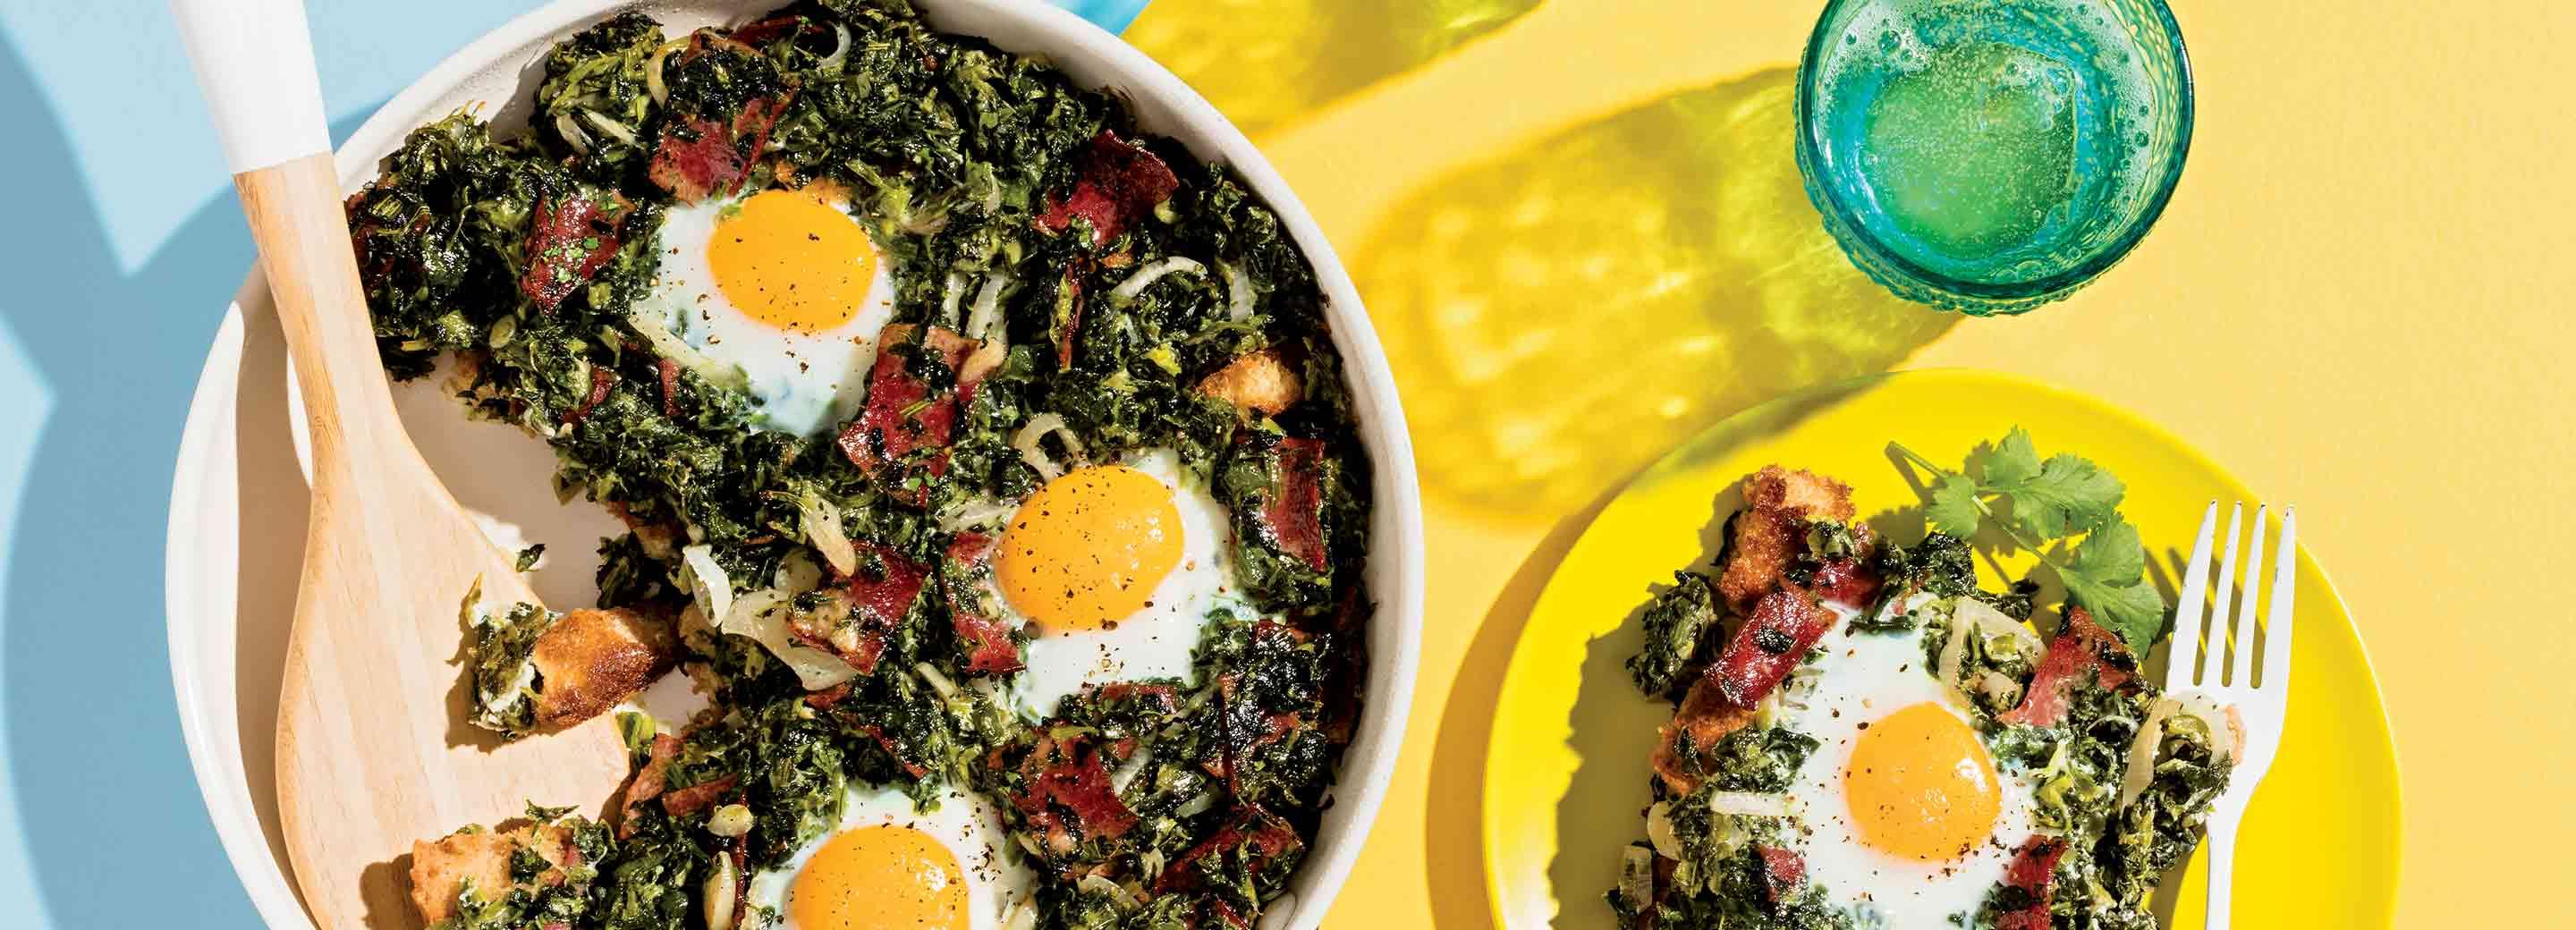 One-Pan Baked Eggs & Greens